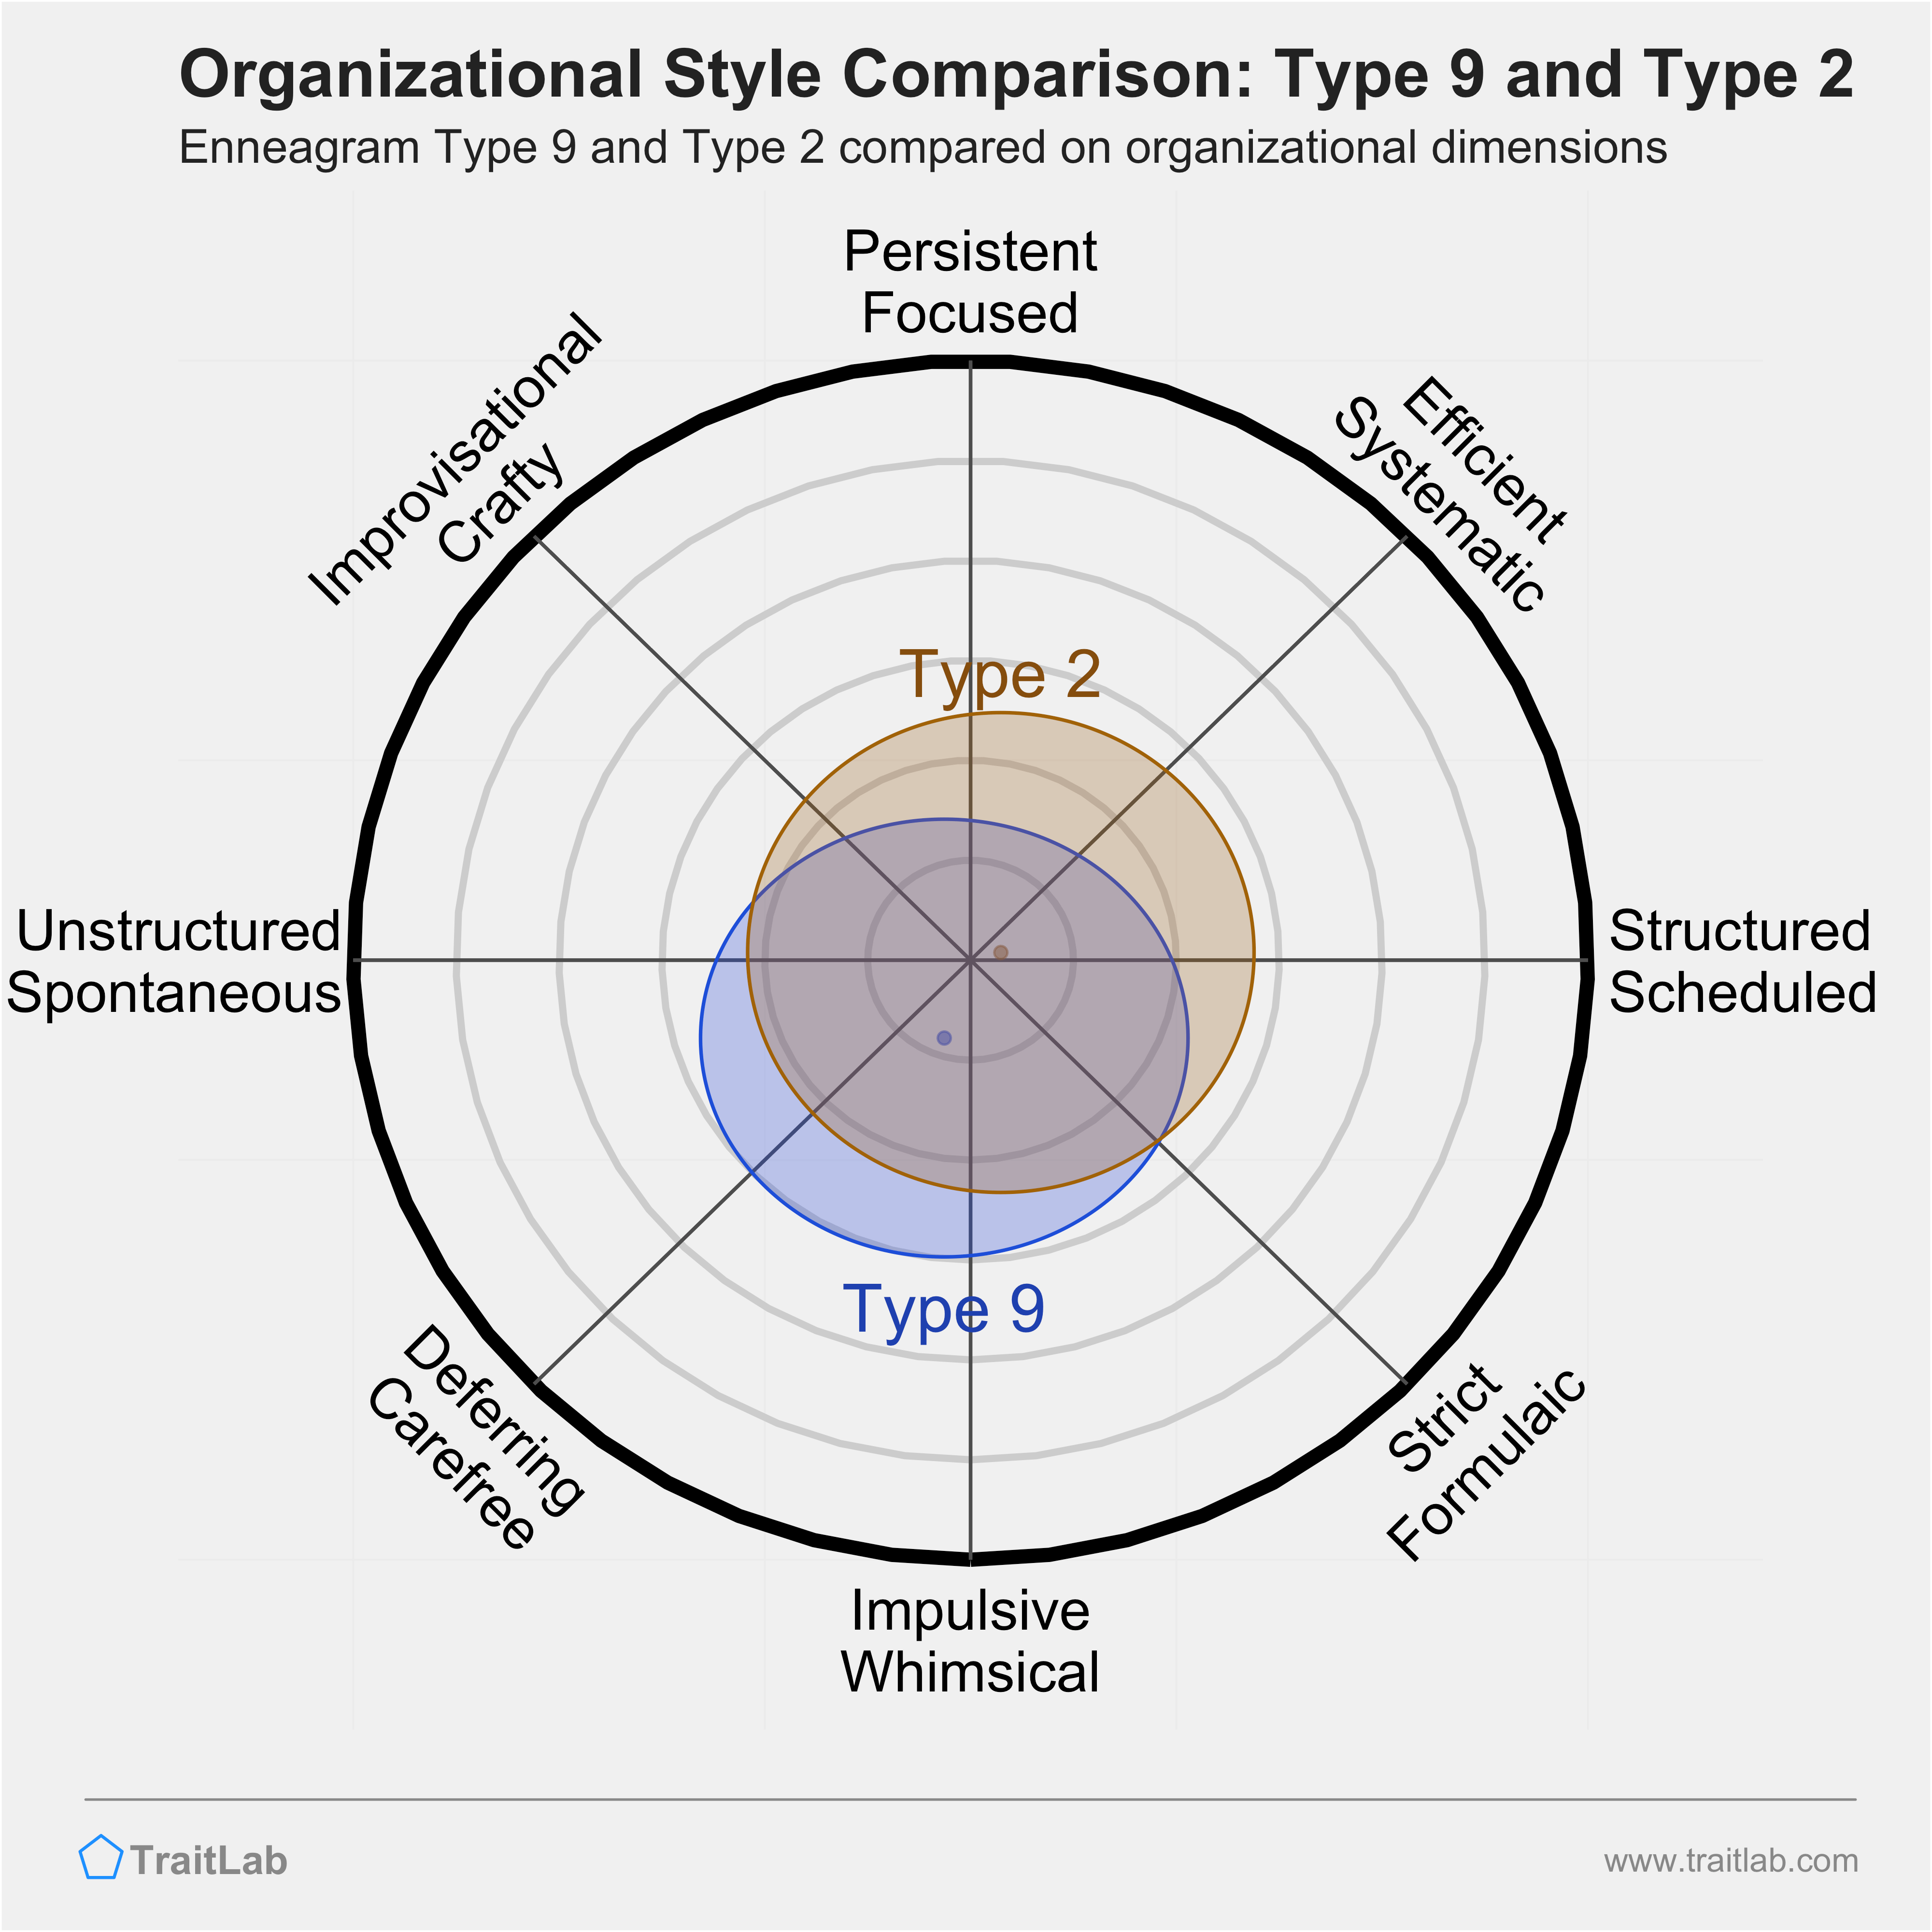 Type 9 and Type 2 comparison across organizational dimensions